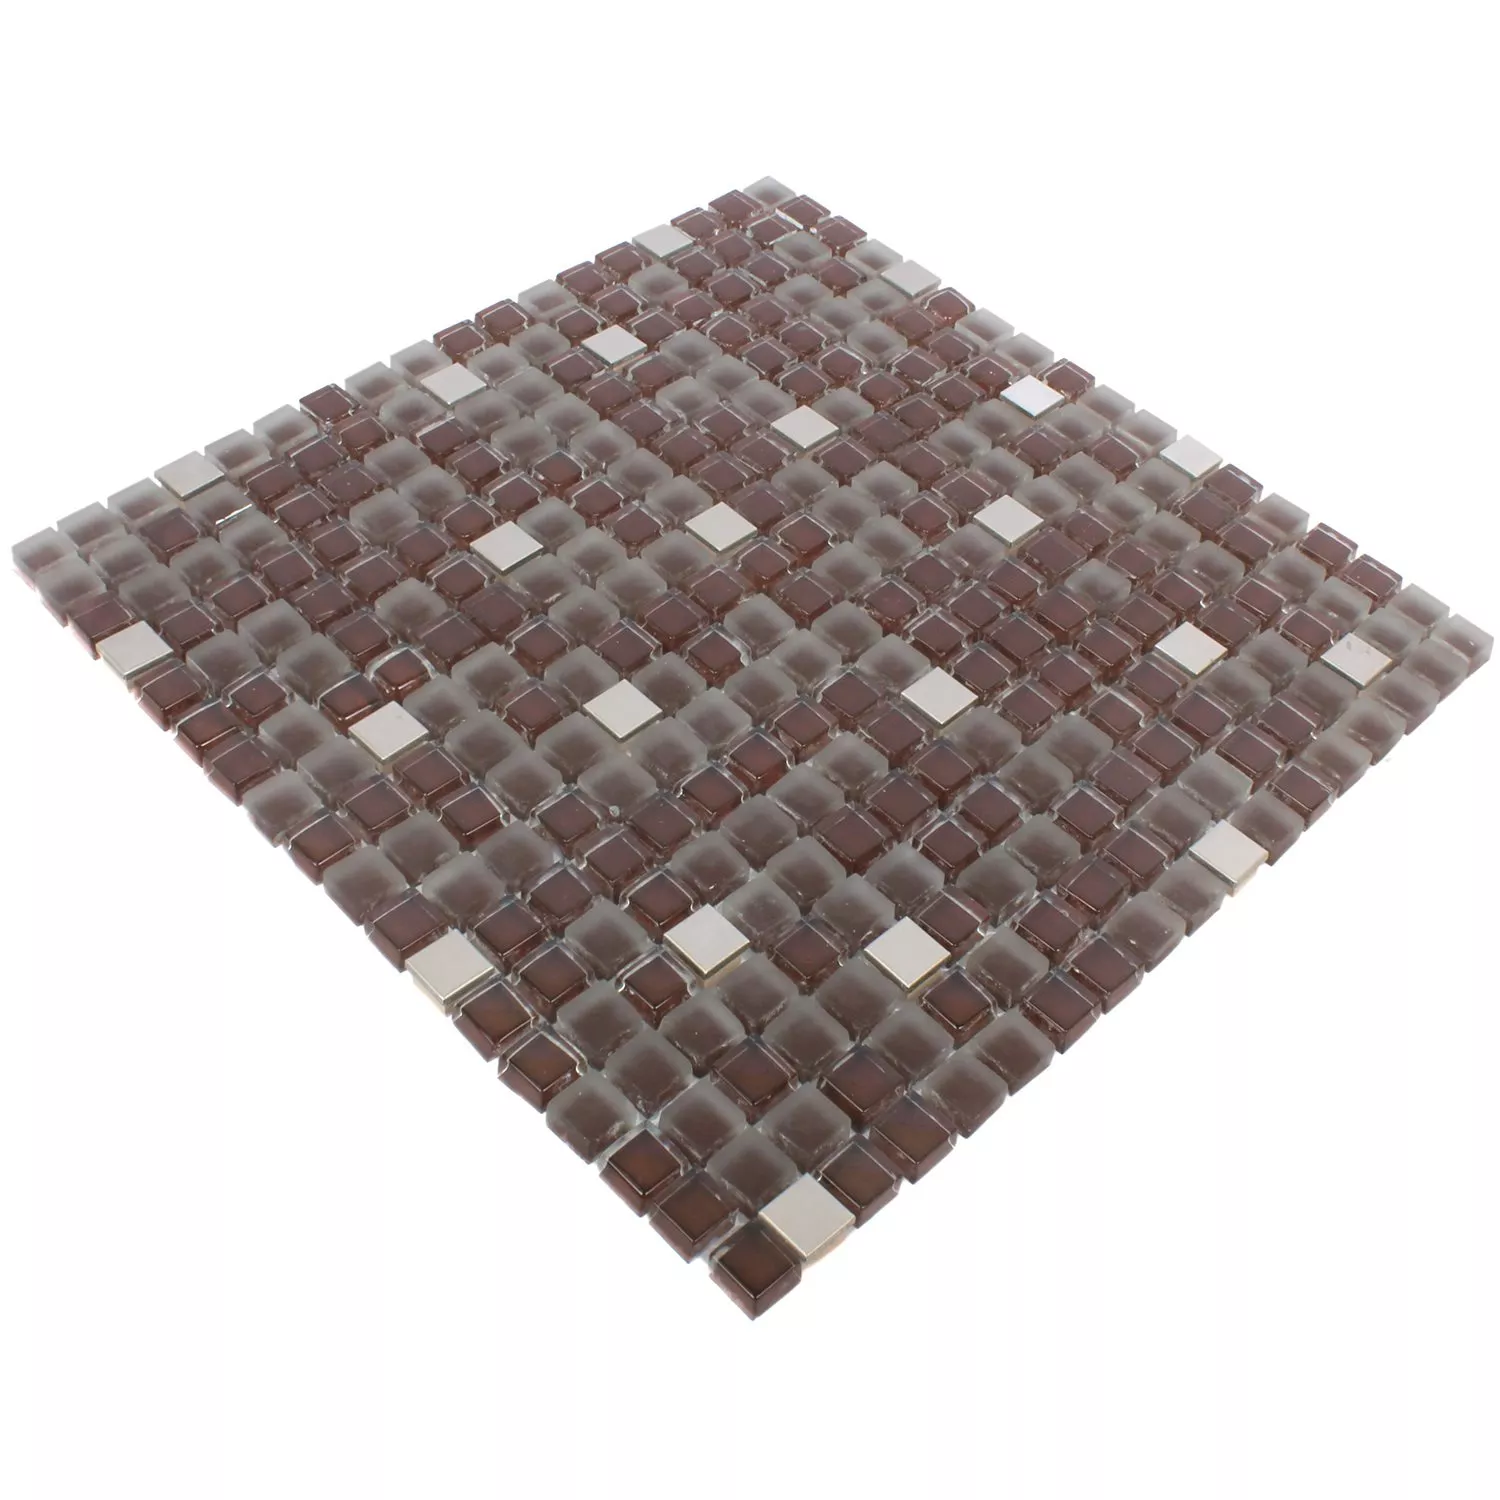 Sample Mosaic Tiles Rotterdam Stainless Steel Glass Mix Brown Silver